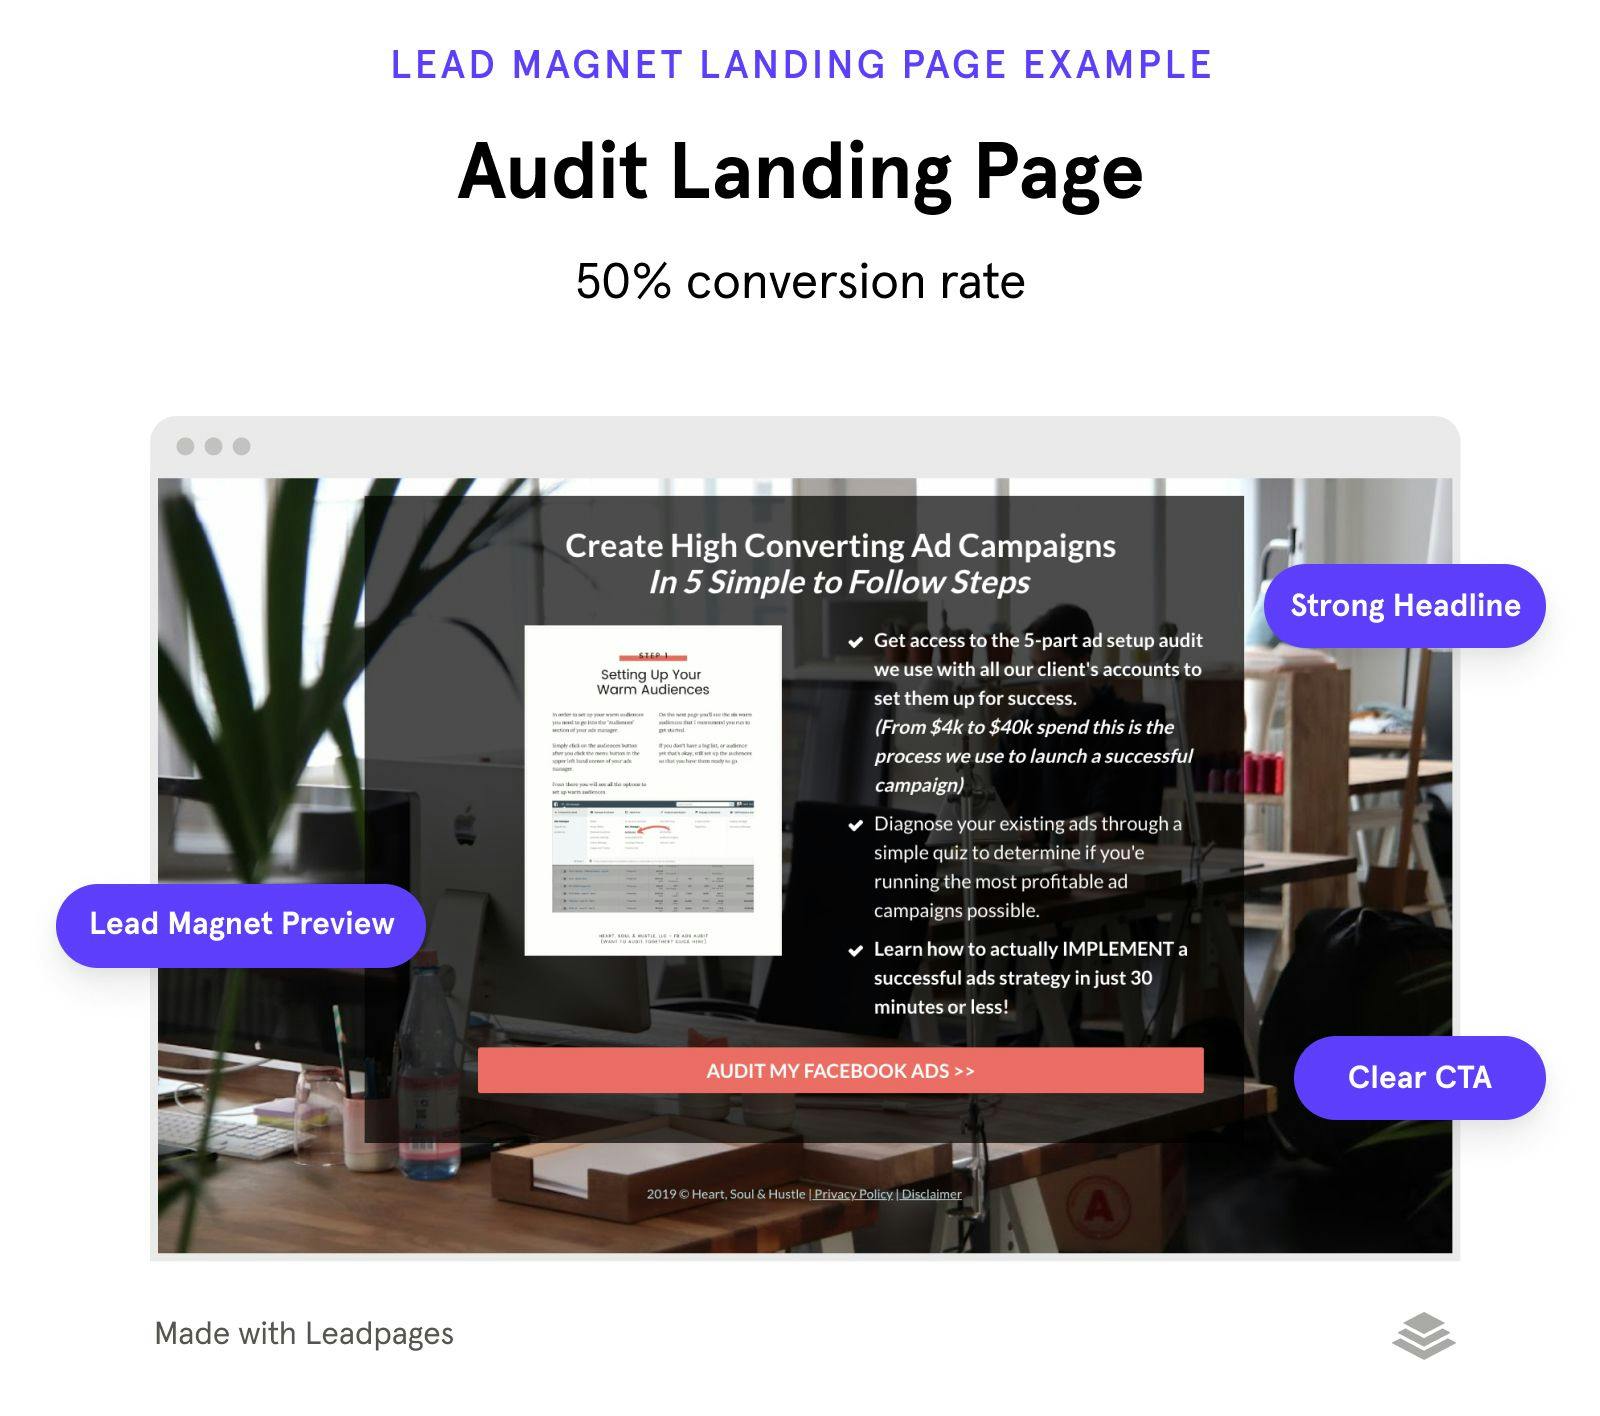 Audit lead magnet landing page example